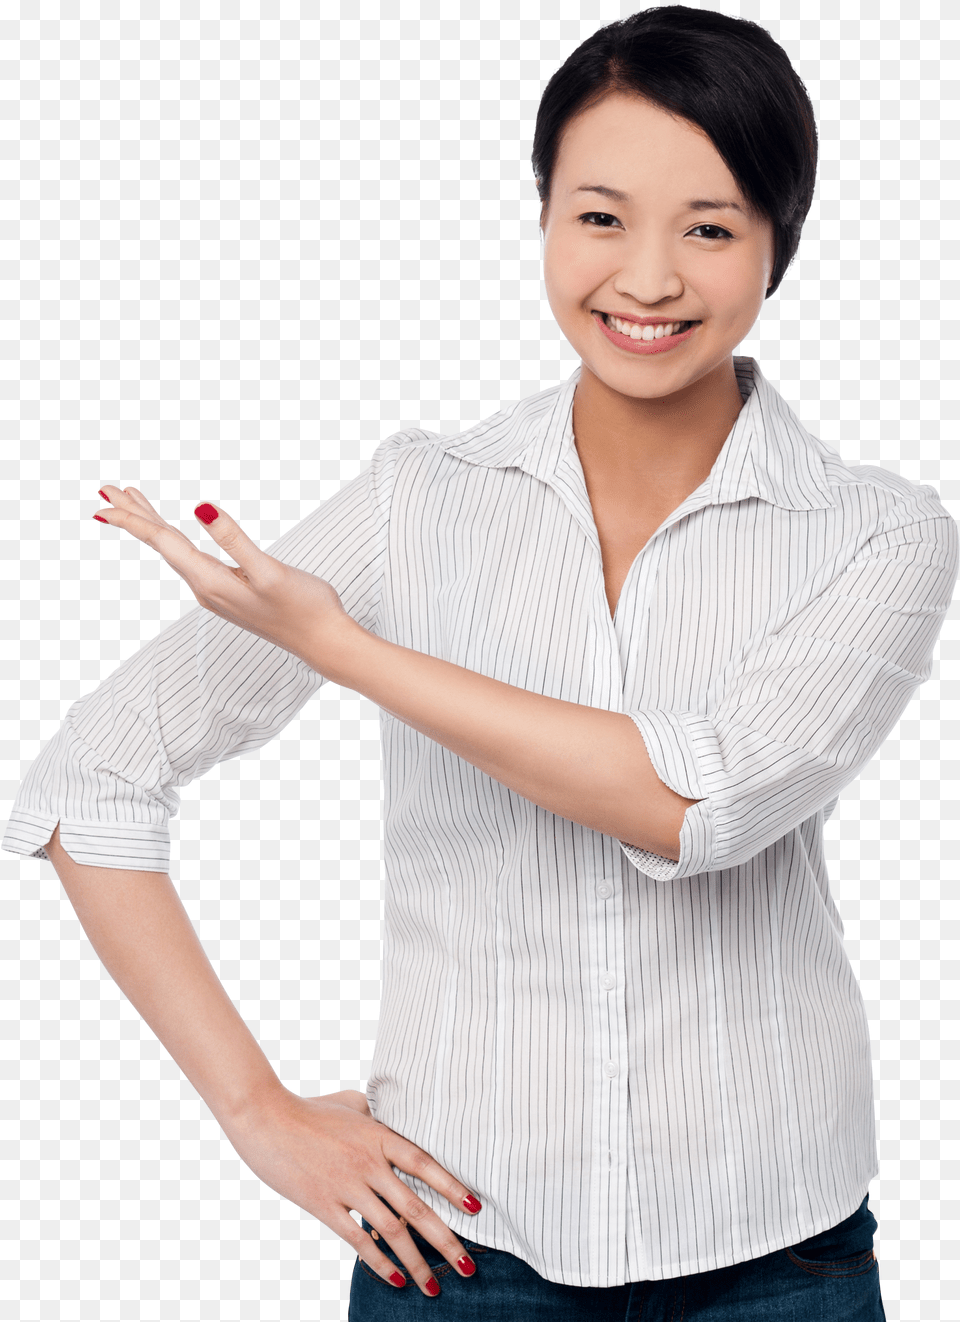 Women Pointing Left Girls Image Pointing The Text Png